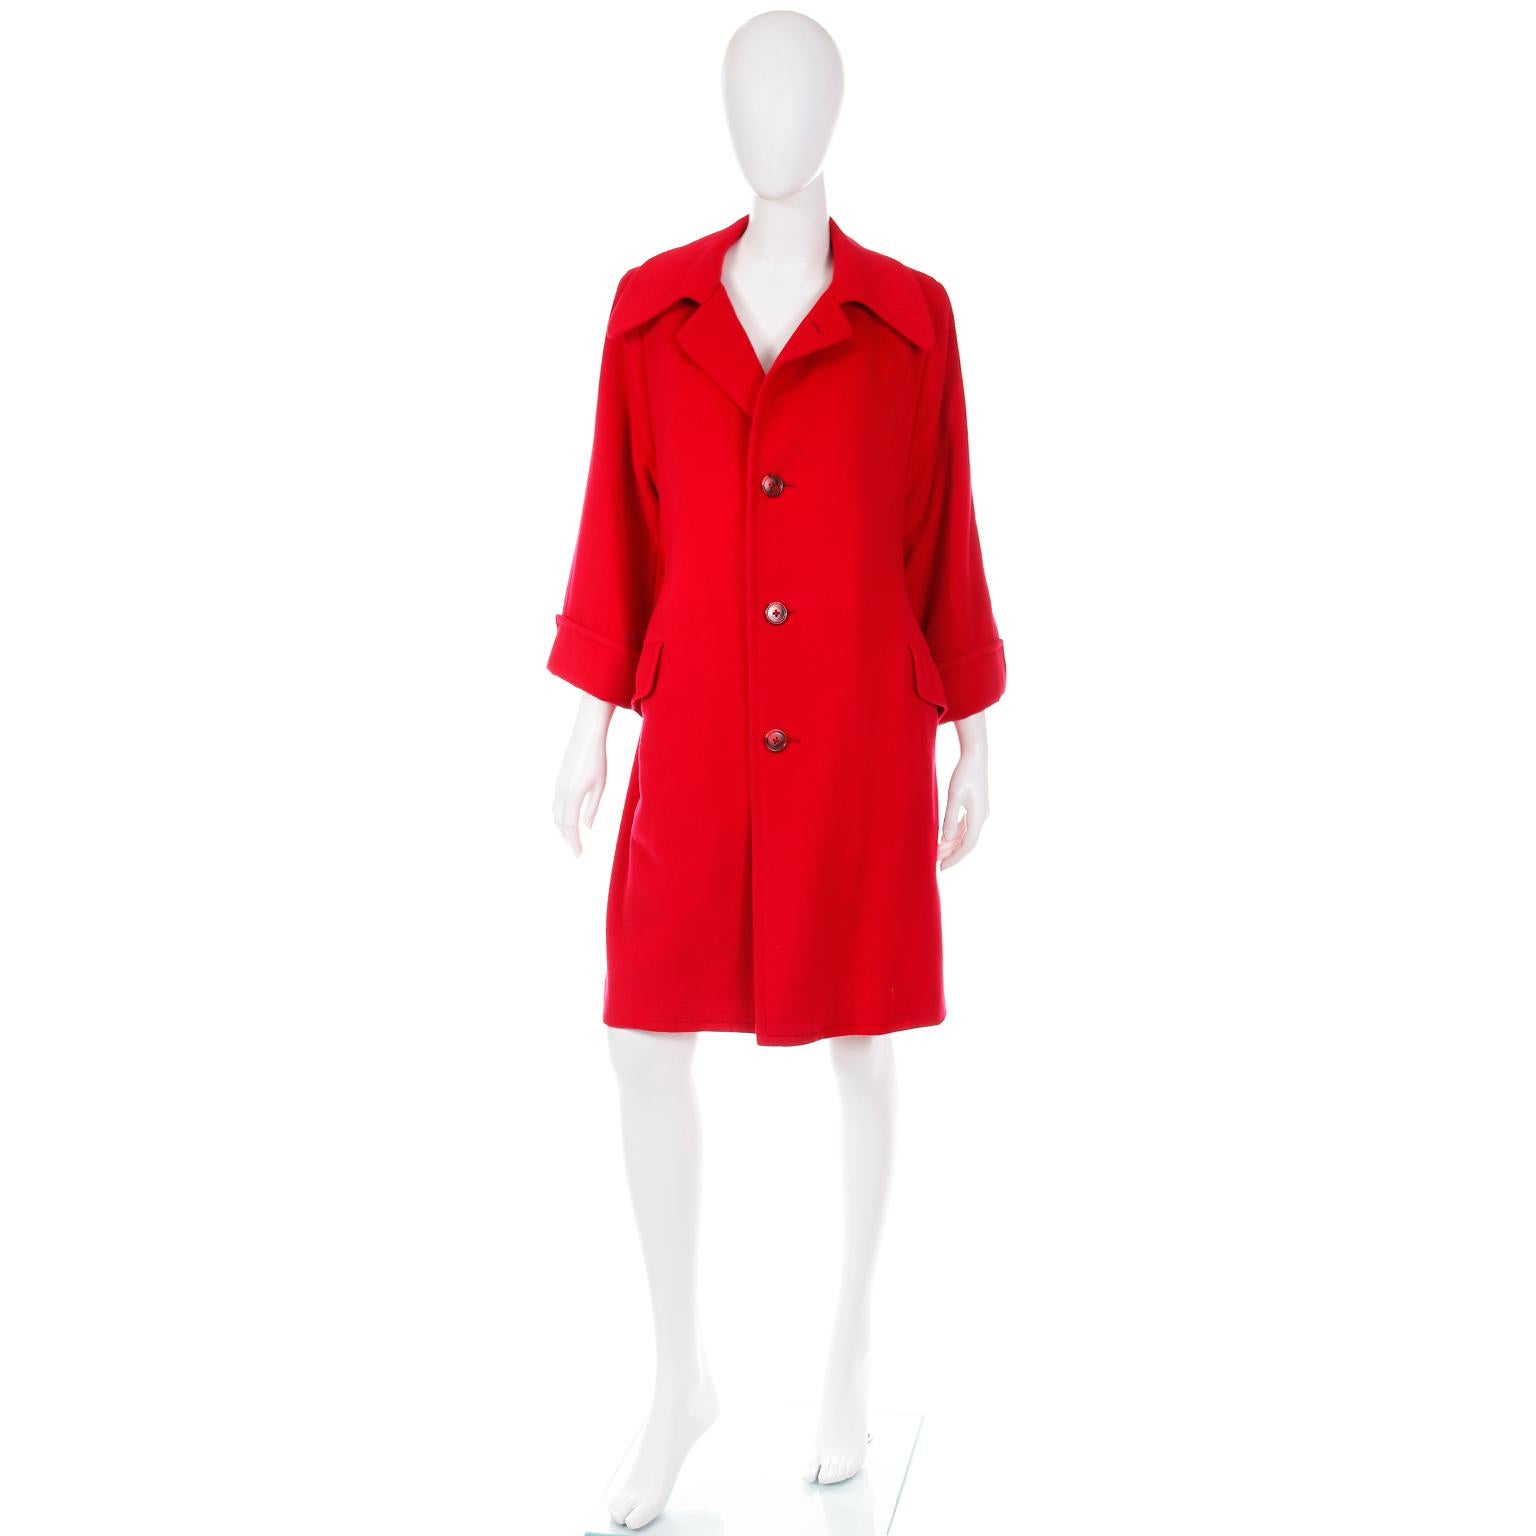 This beautiful luxe cashmere coat is in the perfect shade of red and was custom made in Hong Kong. The coat has two flap front pockets and 2 inside slash buttoned pockets. There is a center back 16